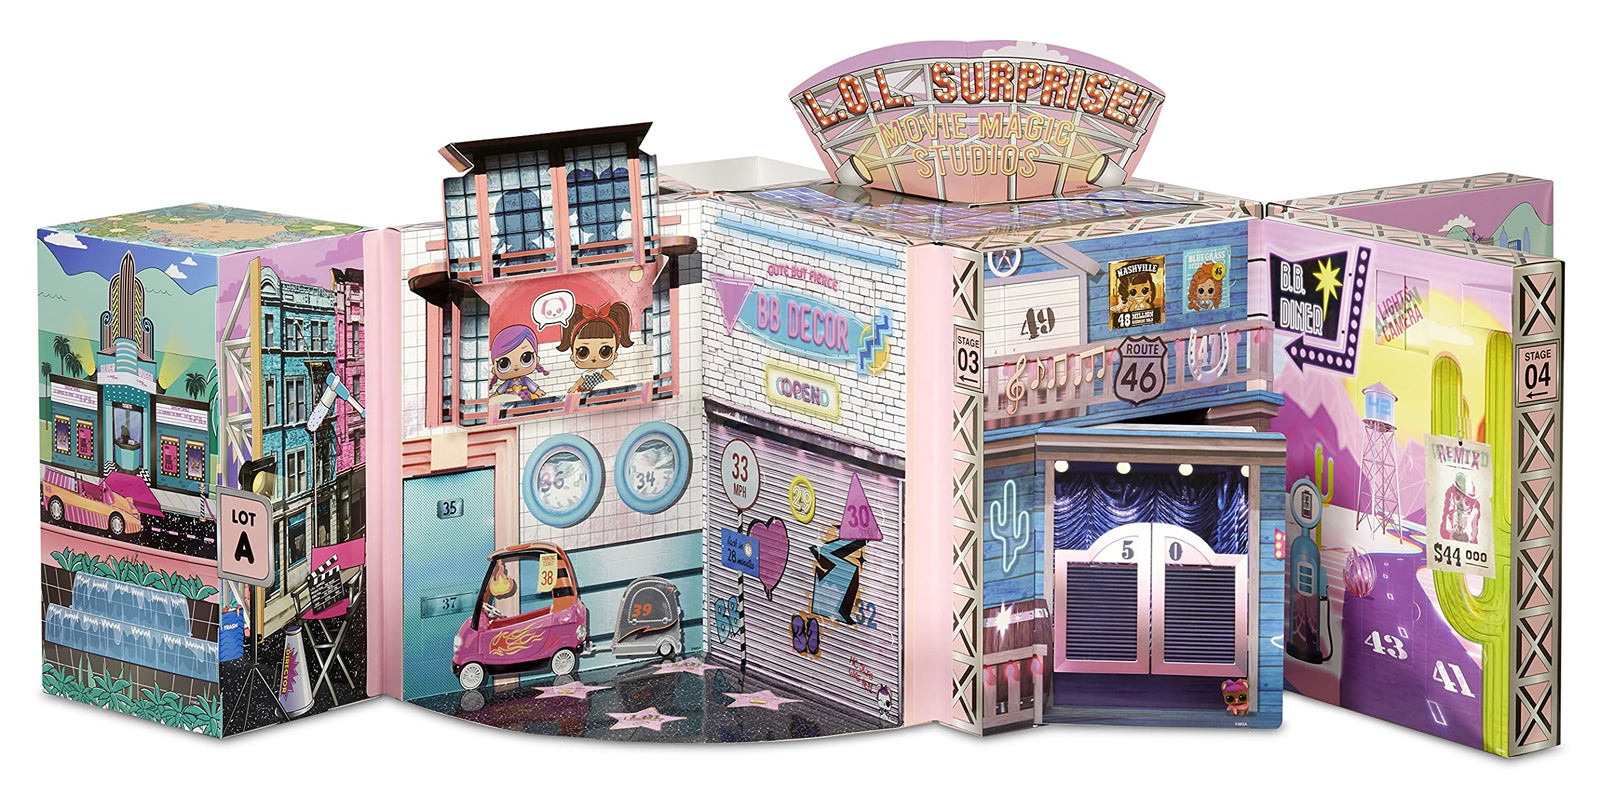 LOL Surprise OMG Movie Magic Studios with 70+ Surprises, 12 Dolls Including 2 Fashion Dolls, 4 Movie Studio Stages, Green Screen, Phone Tripod, Movie Theater/Set Packaging, and Movie Accessories